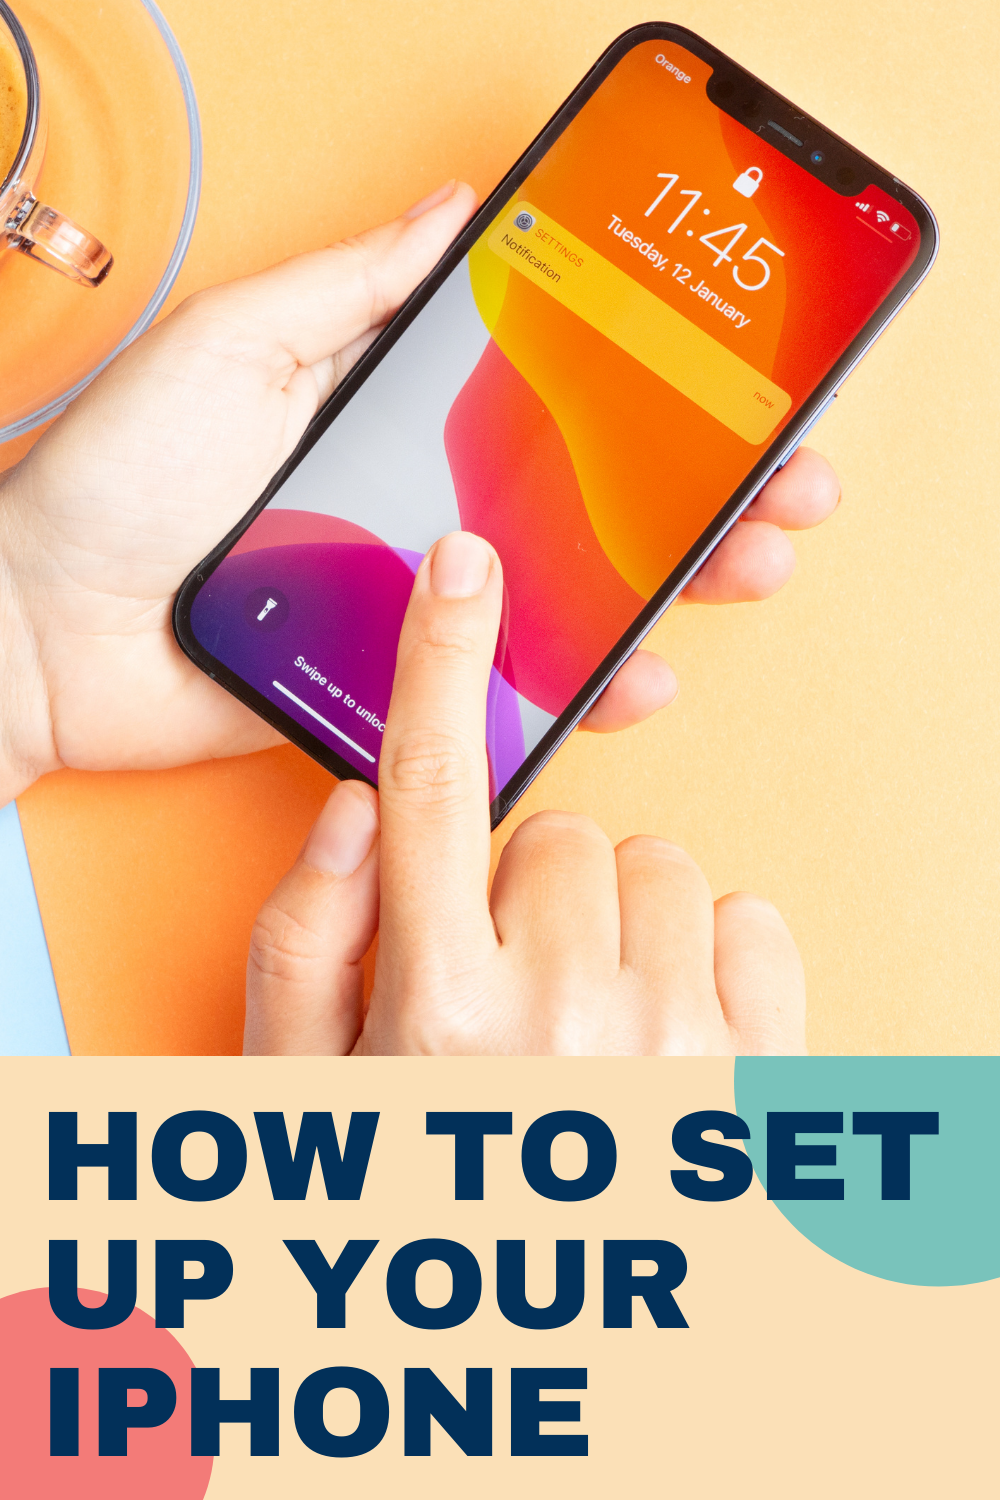 How To Set Up Your iPhone image designed for Pinterest sharing.  Image features hands holding an iPhone.